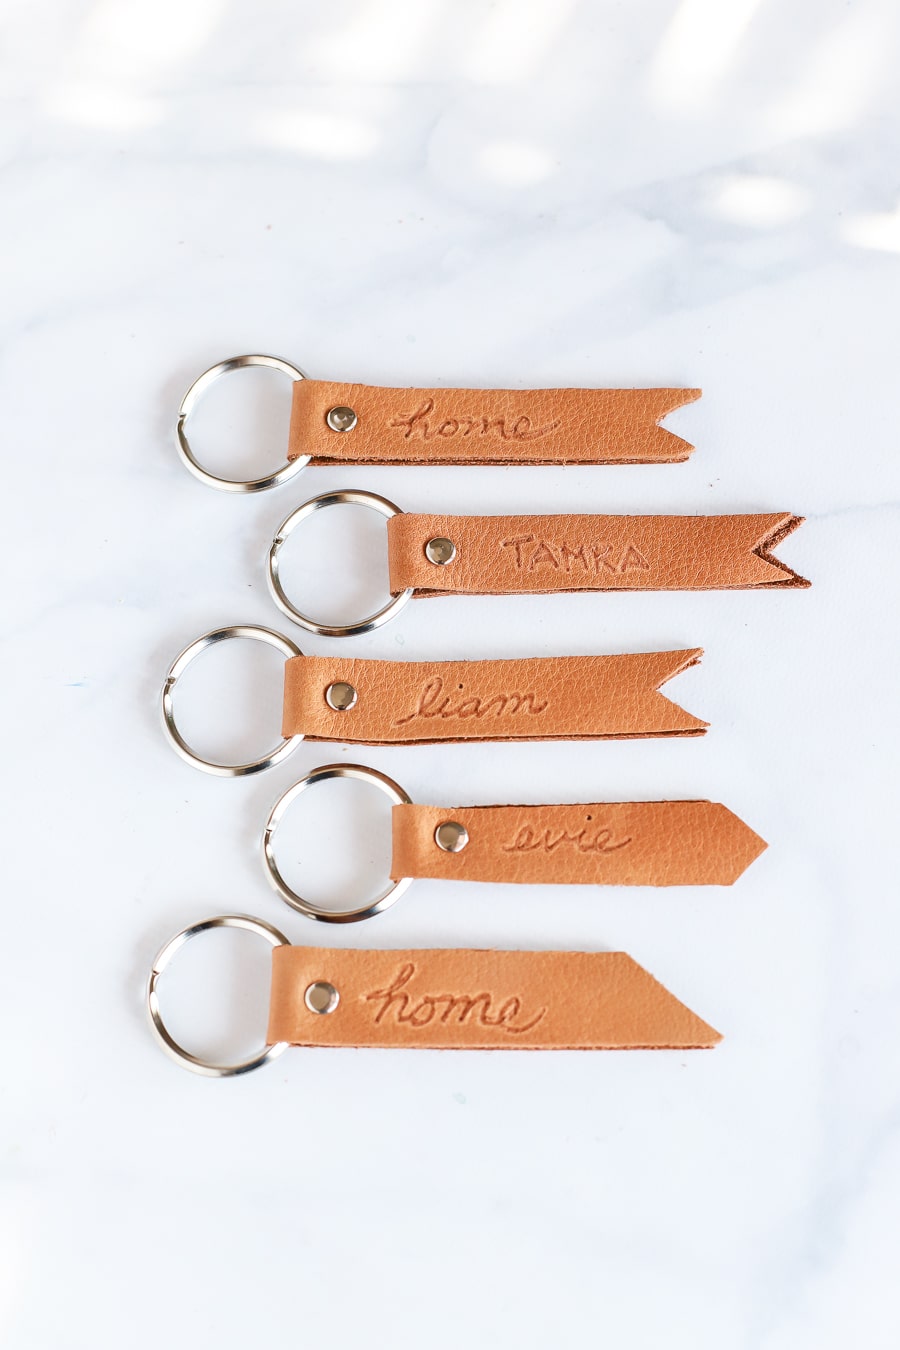 50 DIY Keychains Ideas That Make Great Gifts